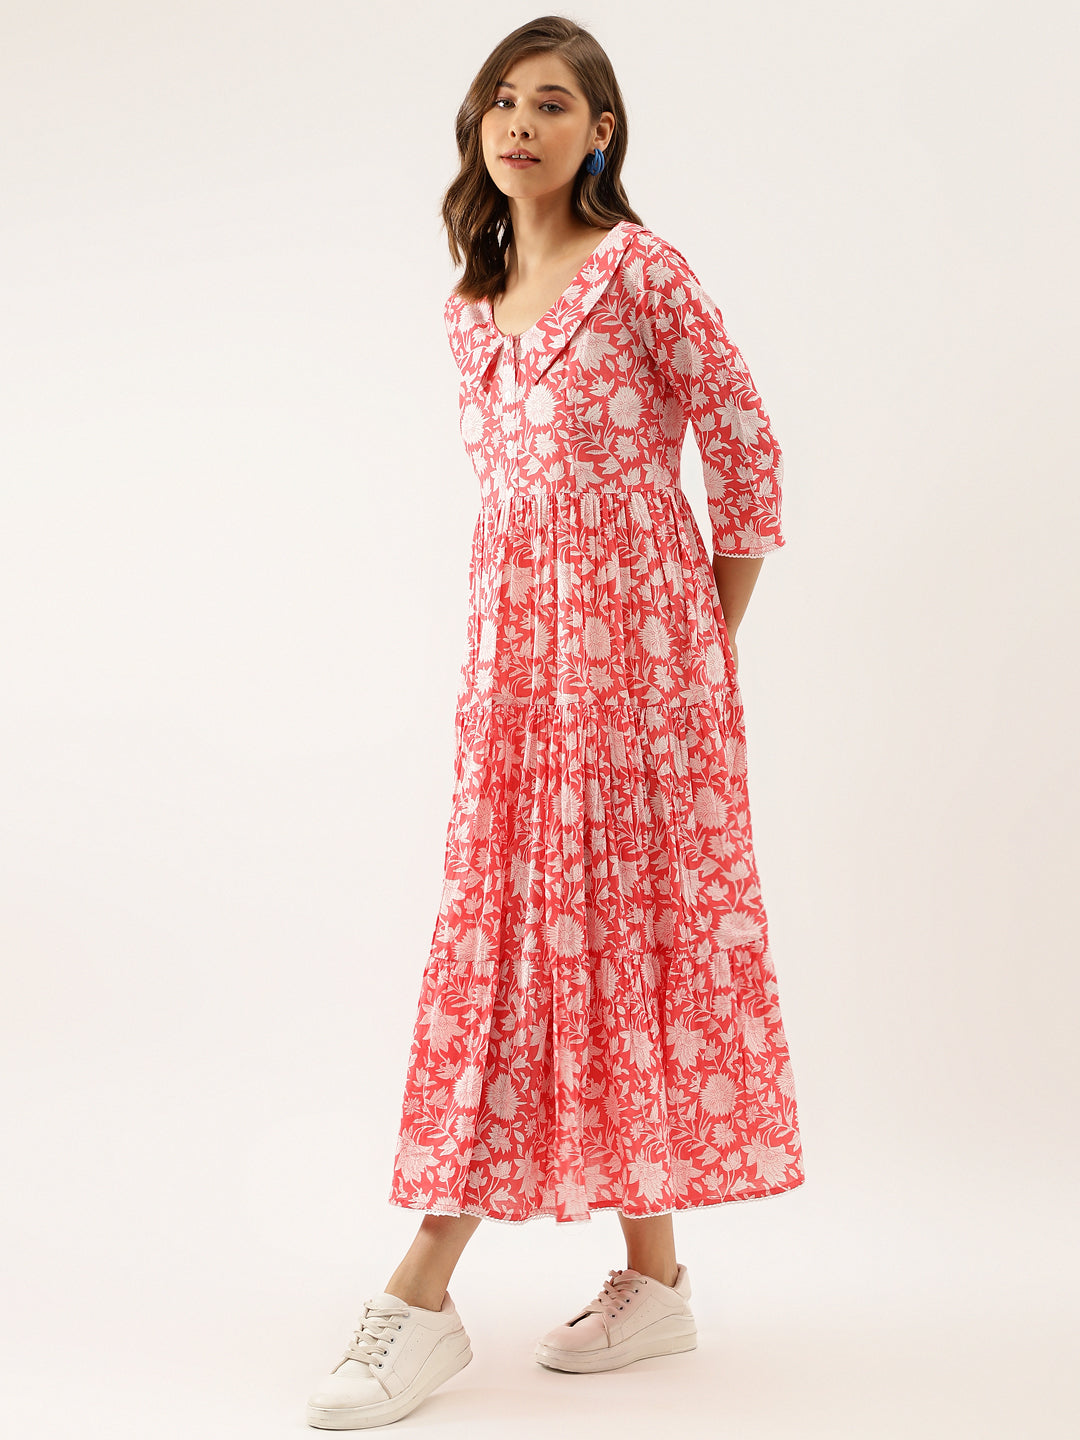 Women Pink Floral Printed Cotton Ethnic Dress